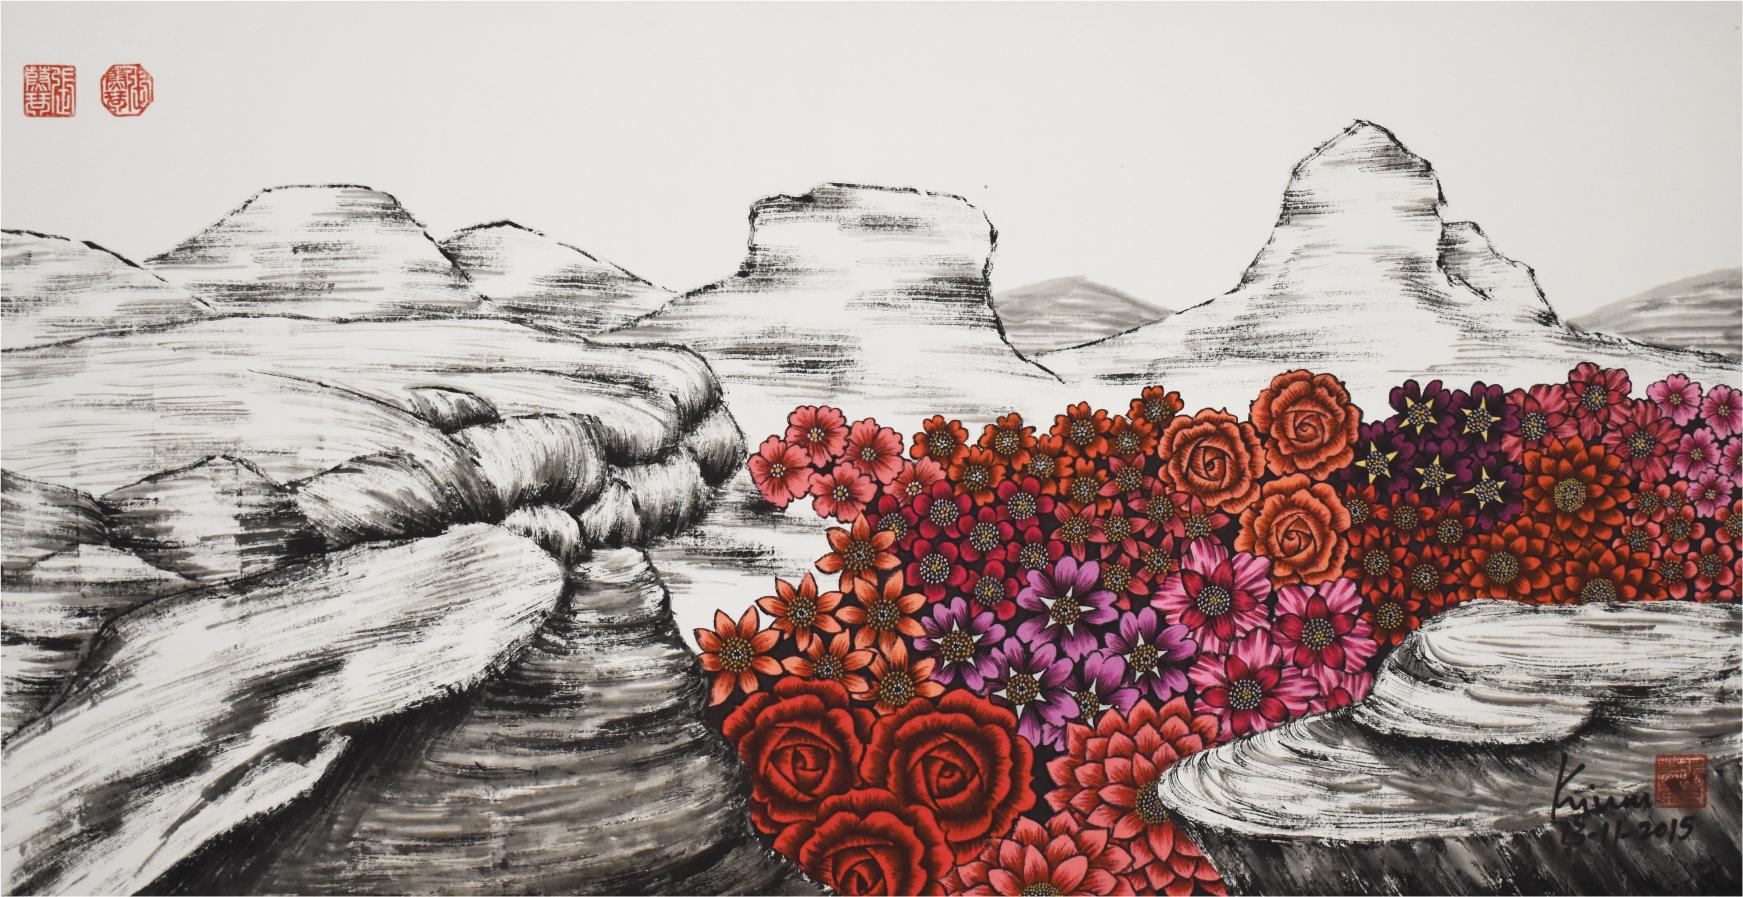 Kium Portrait Painting - Floating Red Flowers In Surrealistic Landscape. Chinese Ink In Modern Era.